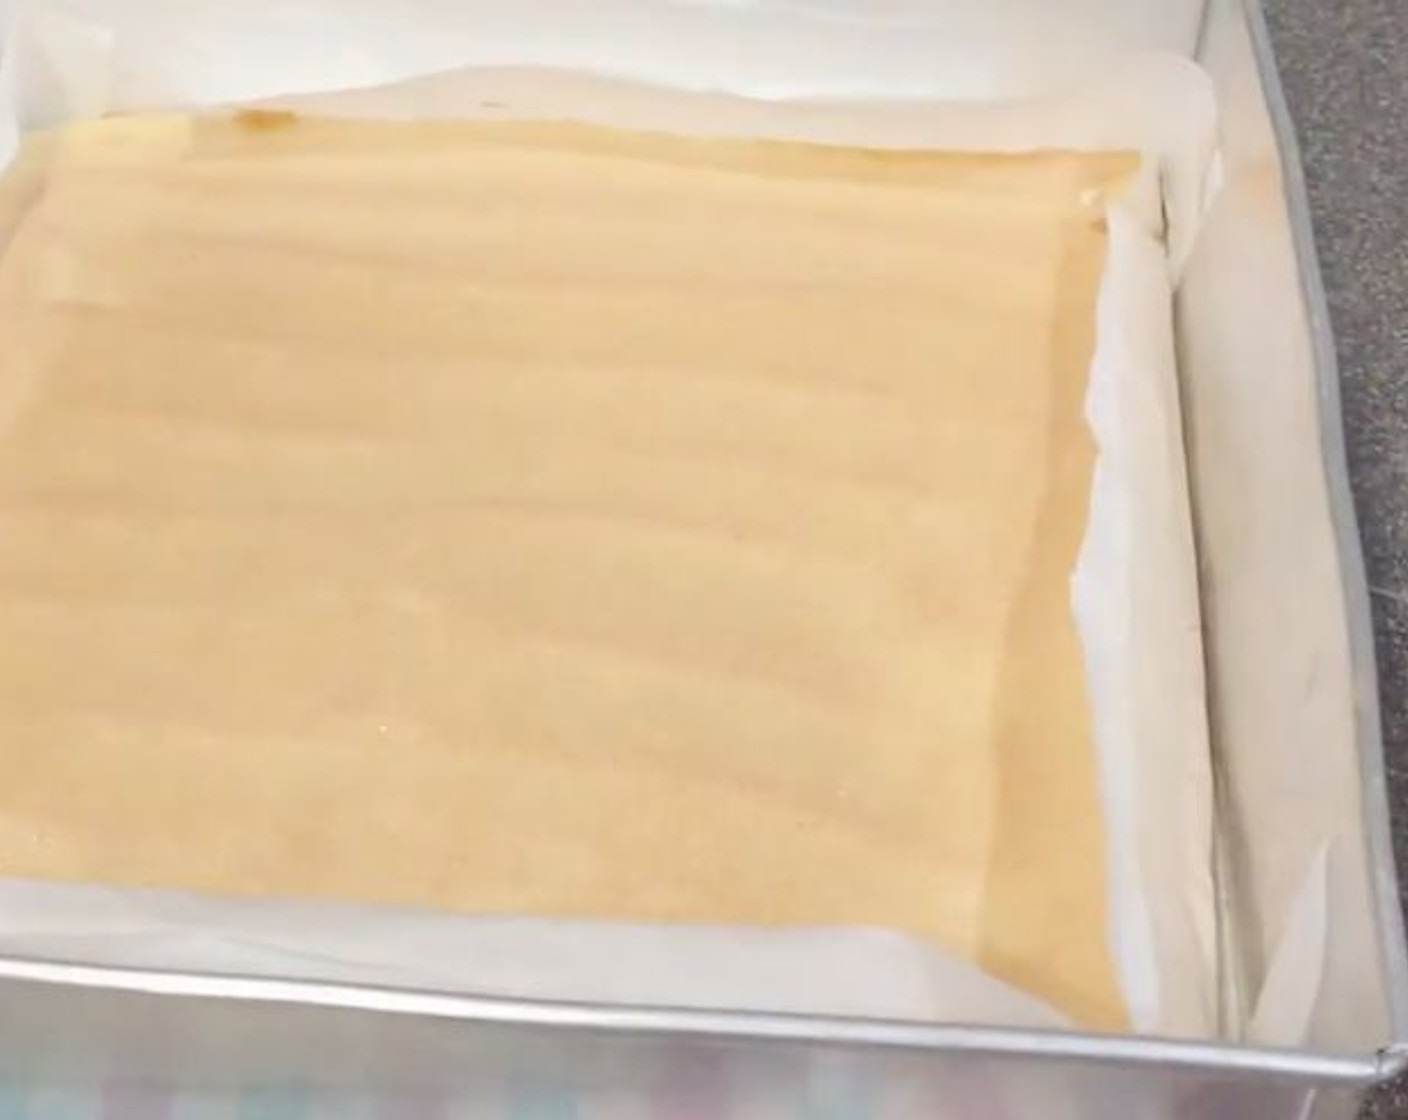 step 16 Bake in a preheated oven for 25 minutes. Let it cool before removing from the parchment paper. Trim off the sides but don't throw them away.